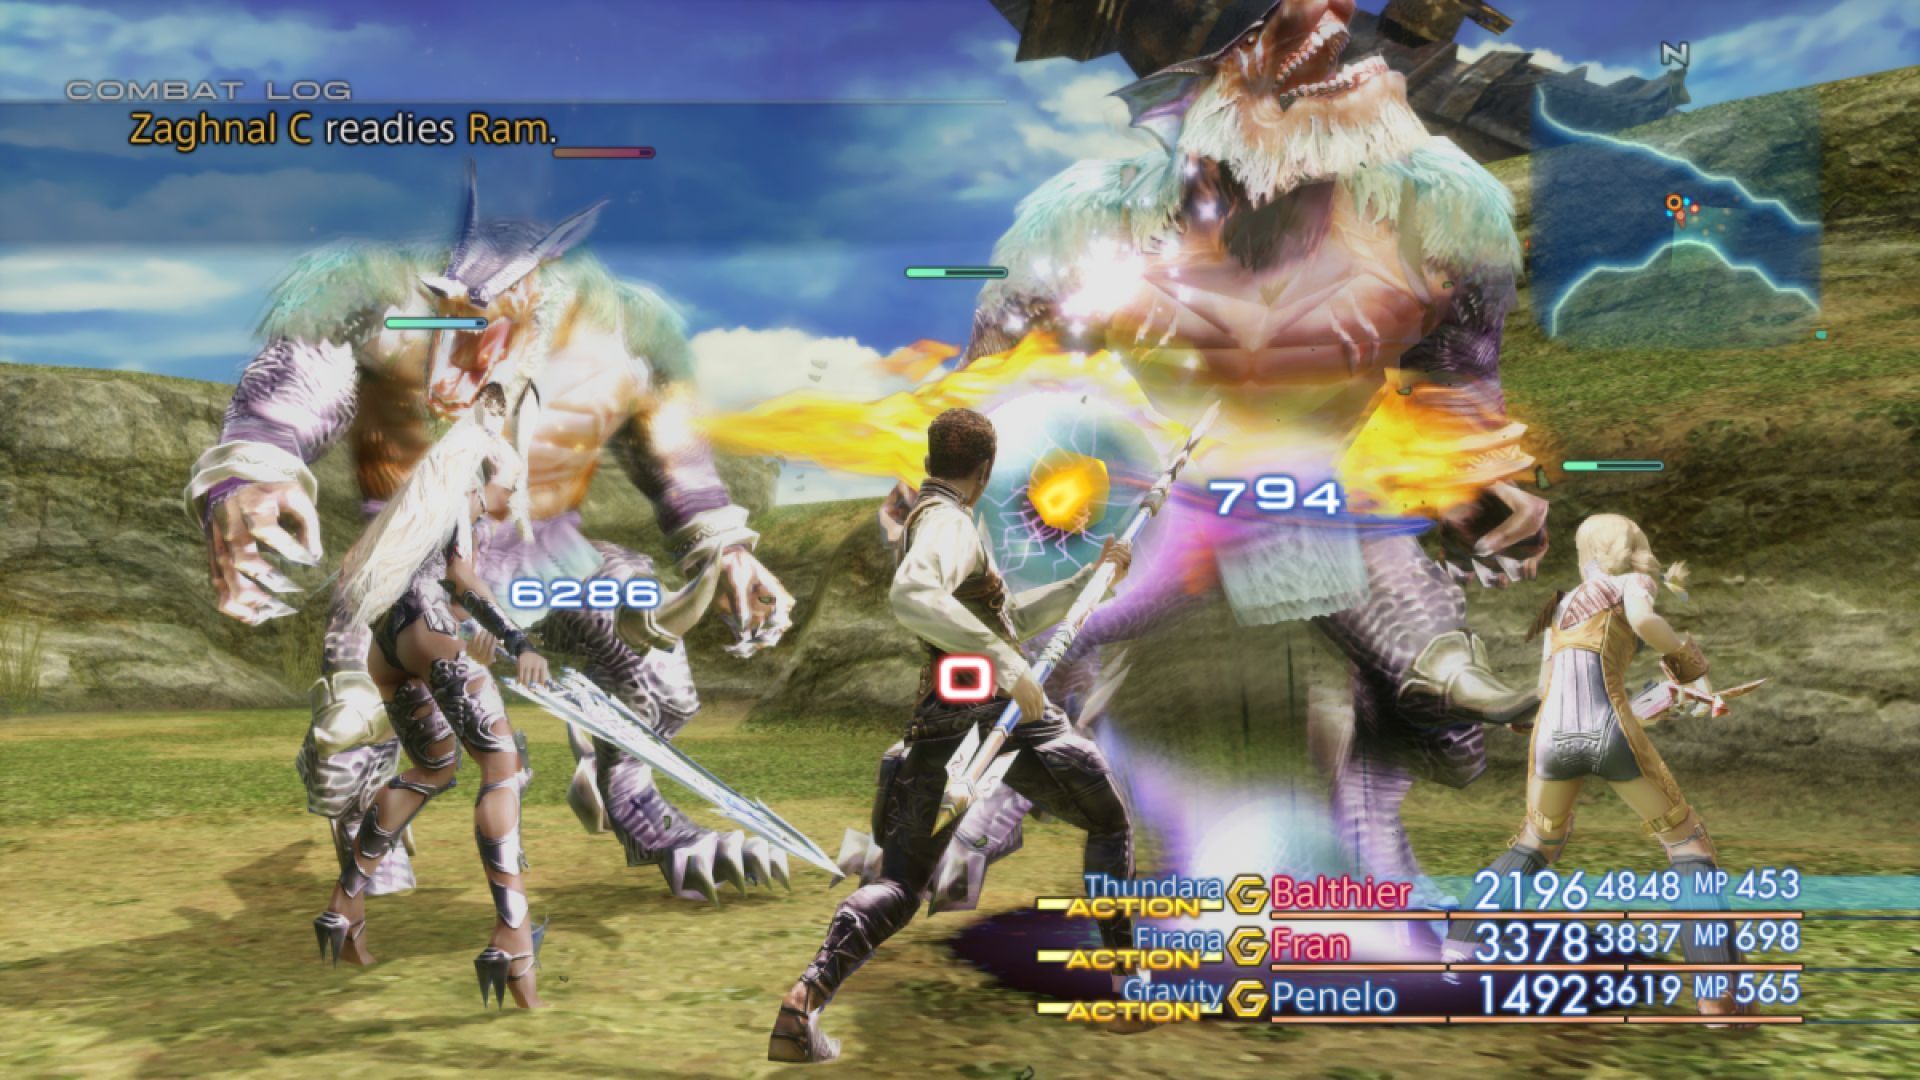 The cast of FF XII in combat